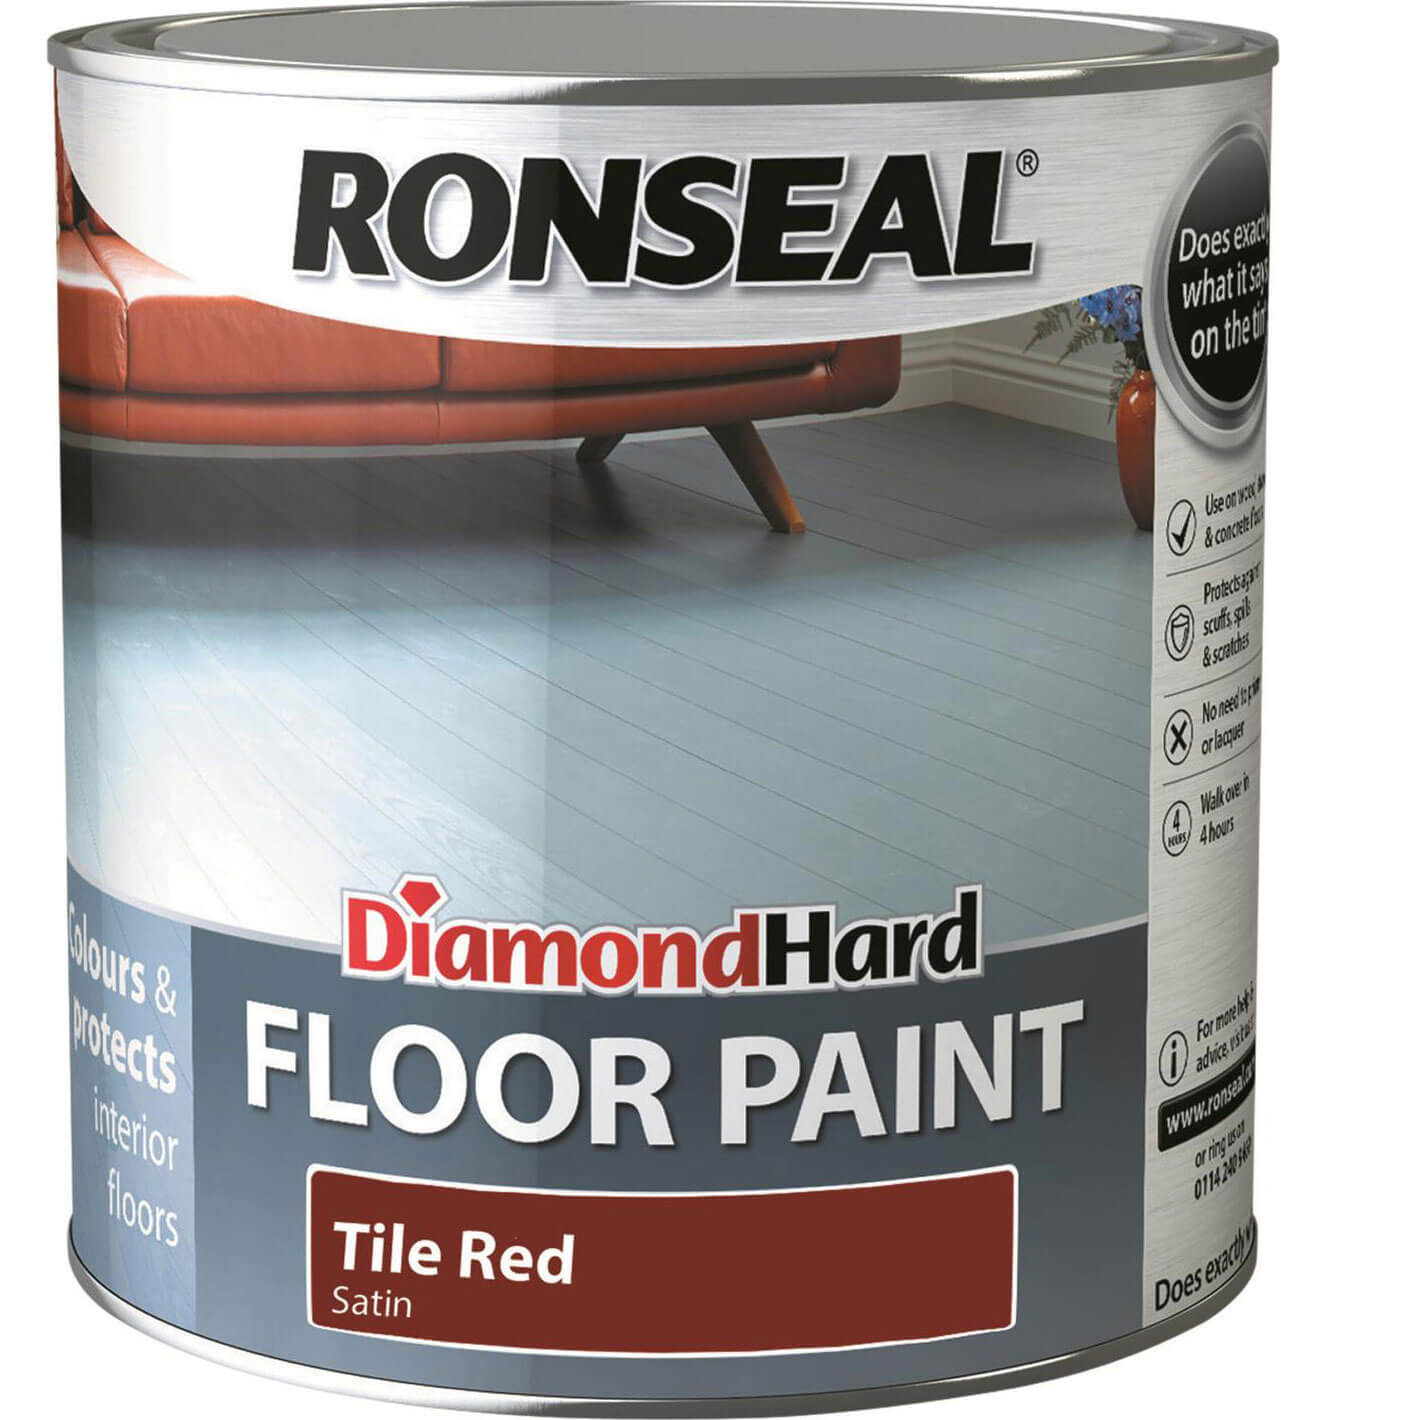 Image of Ronseal Diamond Hard Floor Paint Tile Red 2.5l